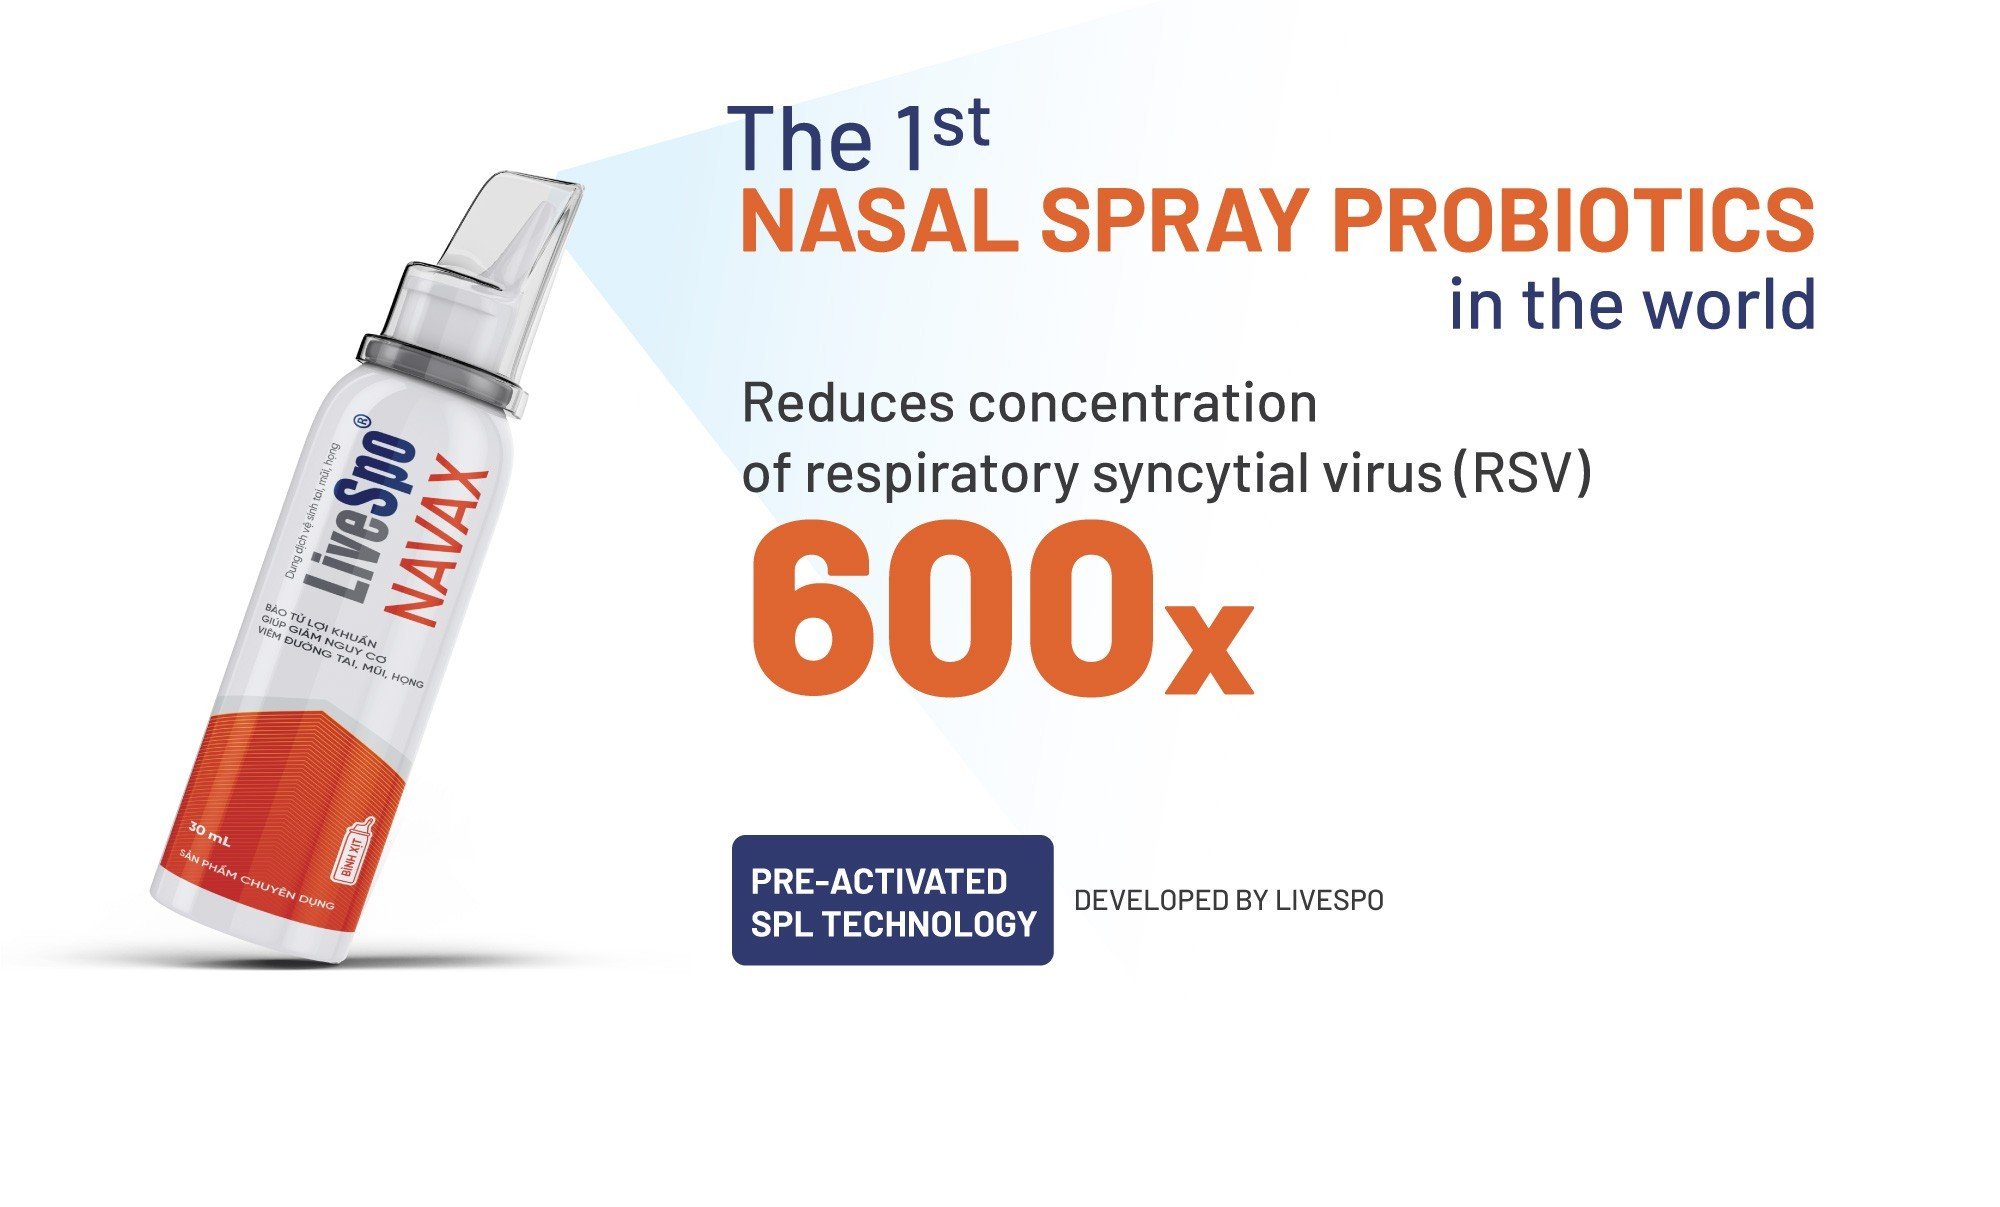 The World's First Nasal Probiotic Spray